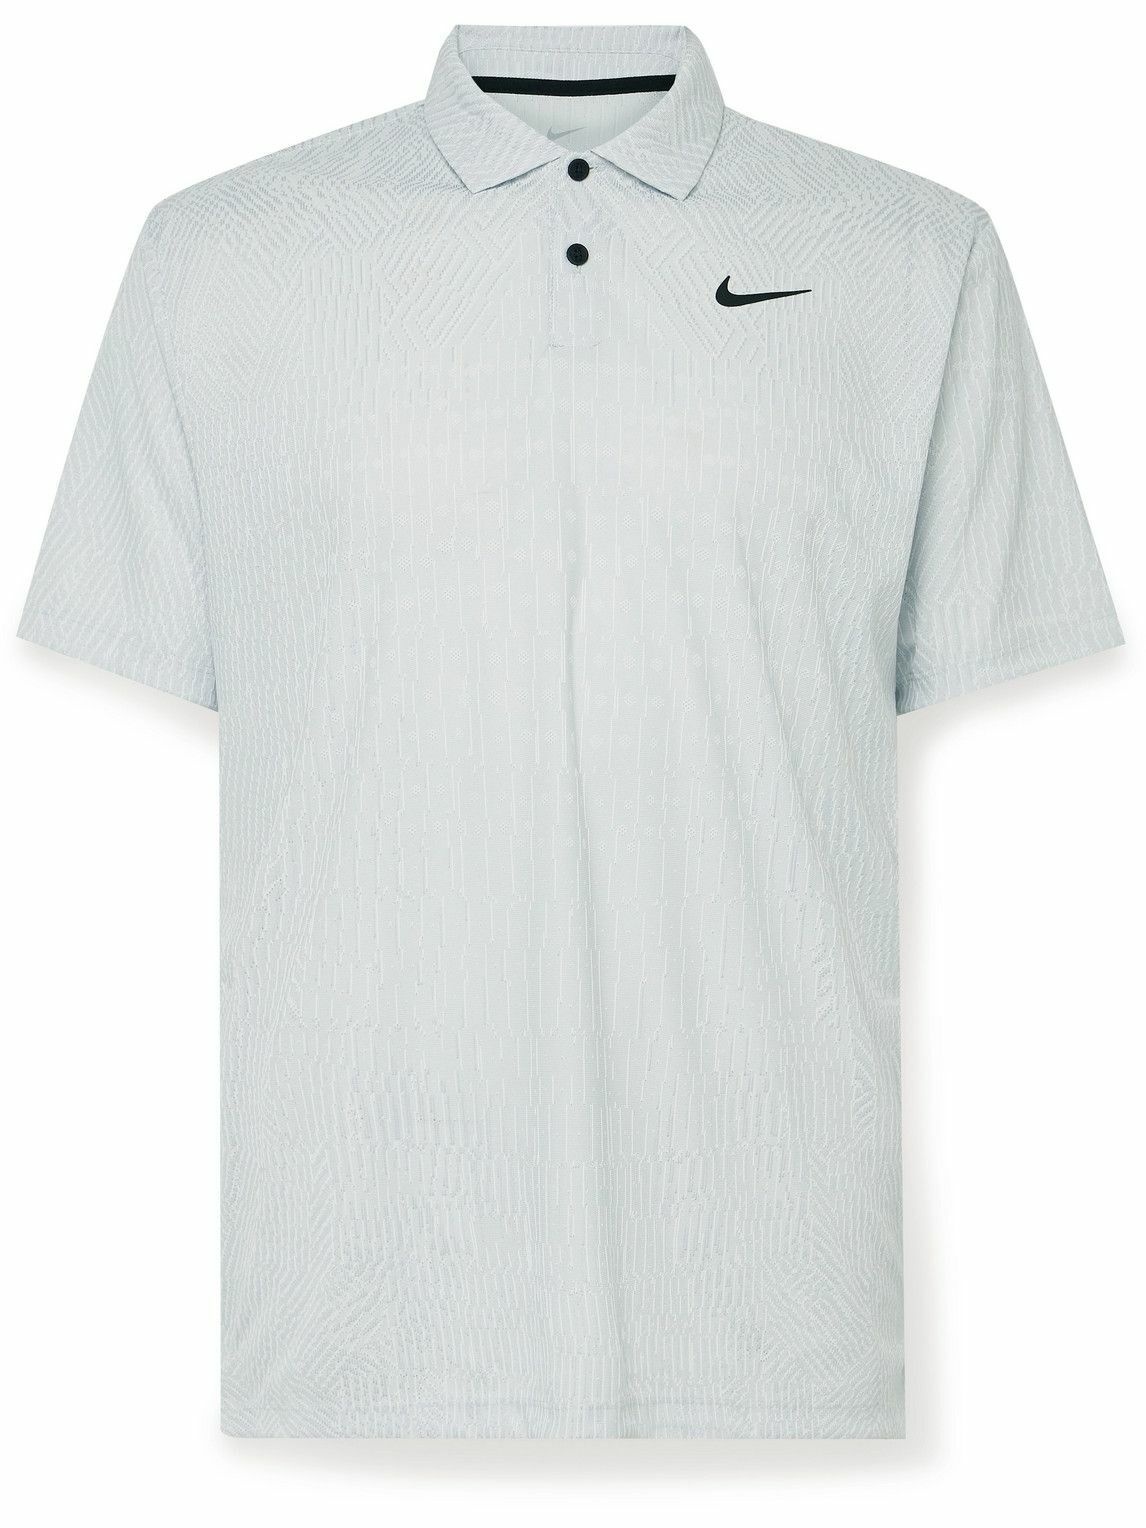 Nike Tiger Woods Collection Dri-Fit Golf White/Grey Stripe Polo